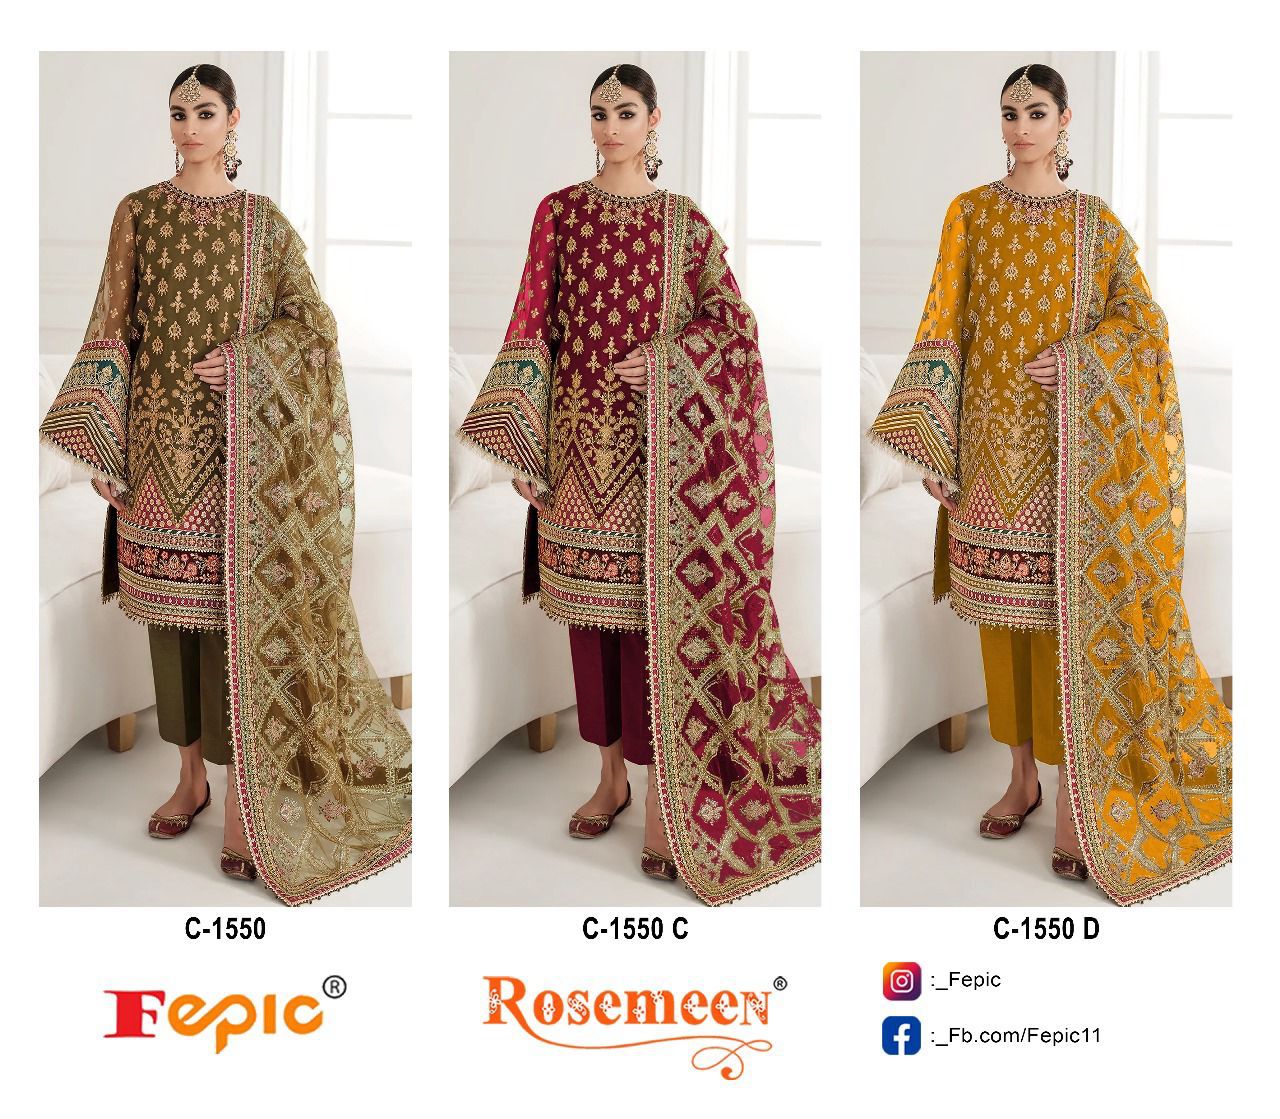 Fepic Rosemeen D.no. C 1550 Organza With Embroidery Work Salwar Kameez At Wholesale Rate - jilaniwholesalesuit